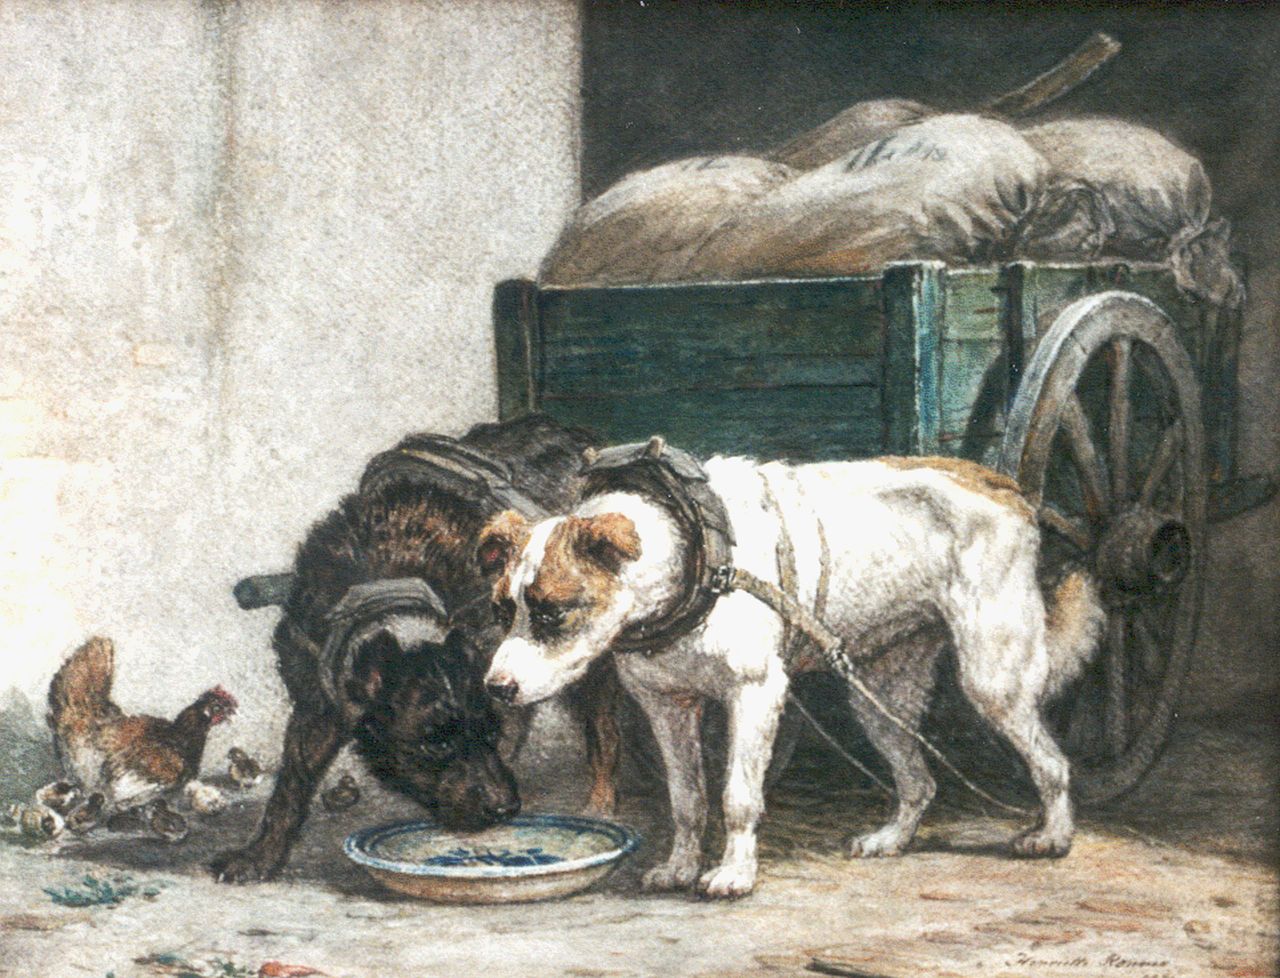 Ronner-Knip H.  | Henriette Ronner-Knip, Draft dogs eating, watercolour on paper 35.0 x 44.5 cm, signed l.r. and dated 1871